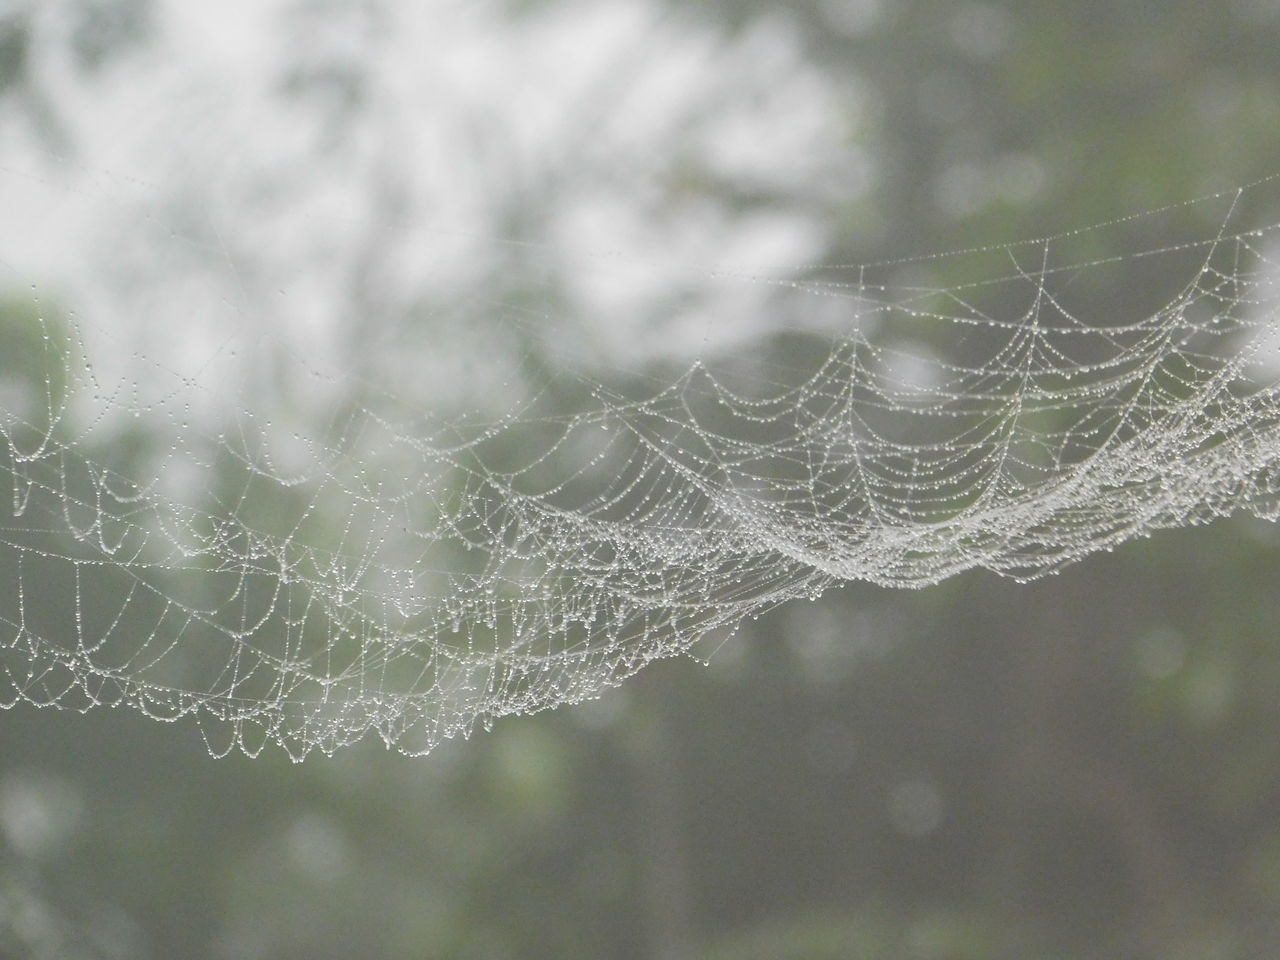 CLOSE-UP OF WET SPIDER WEB IN RAINY SEASON